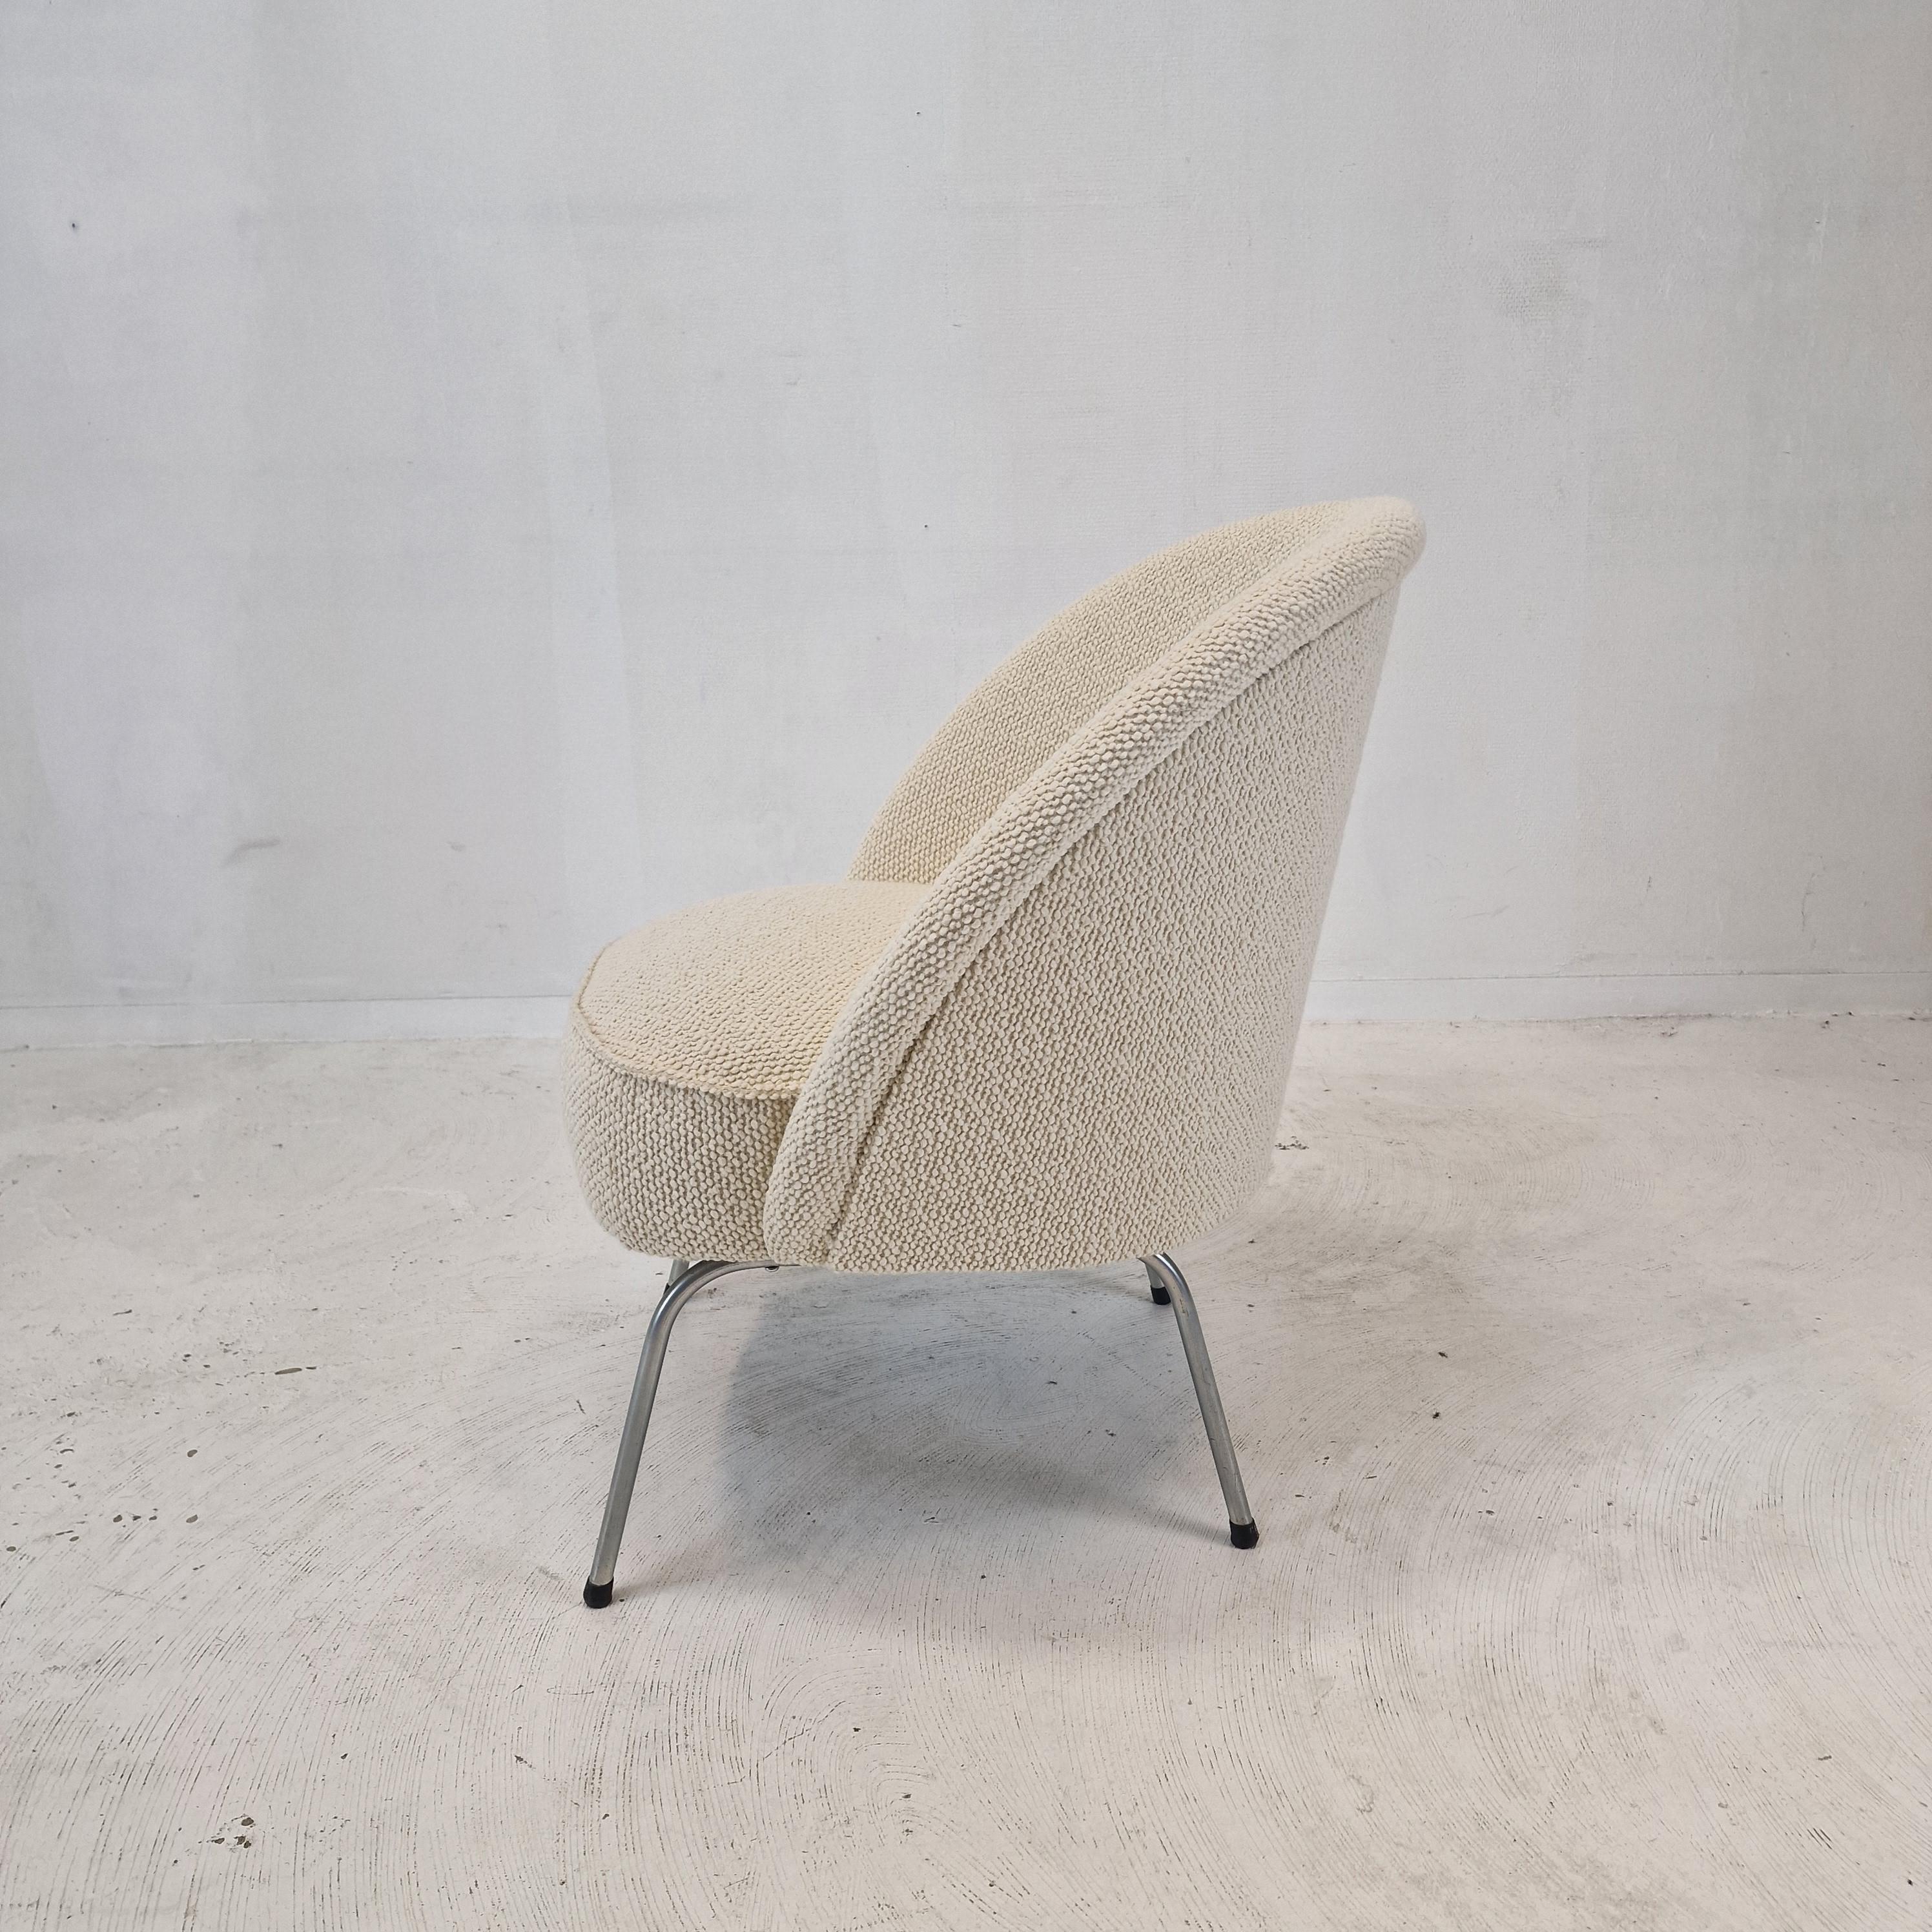 Steel Midcentury Dutch Cocktail or Side Chair, 1970s For Sale